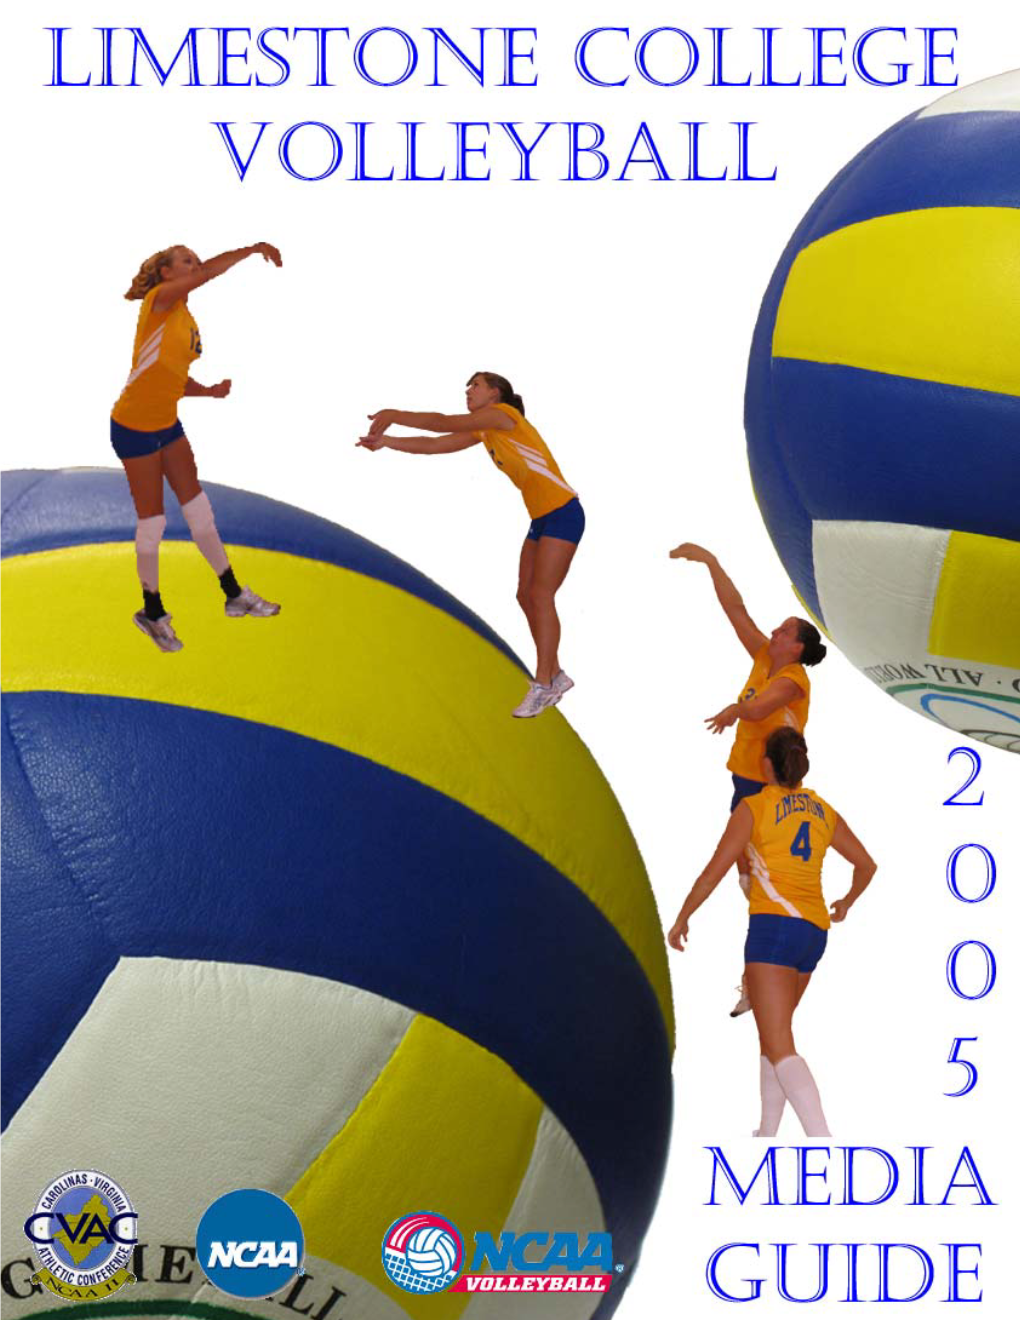 Limestone College Volleyball 2005 Contents